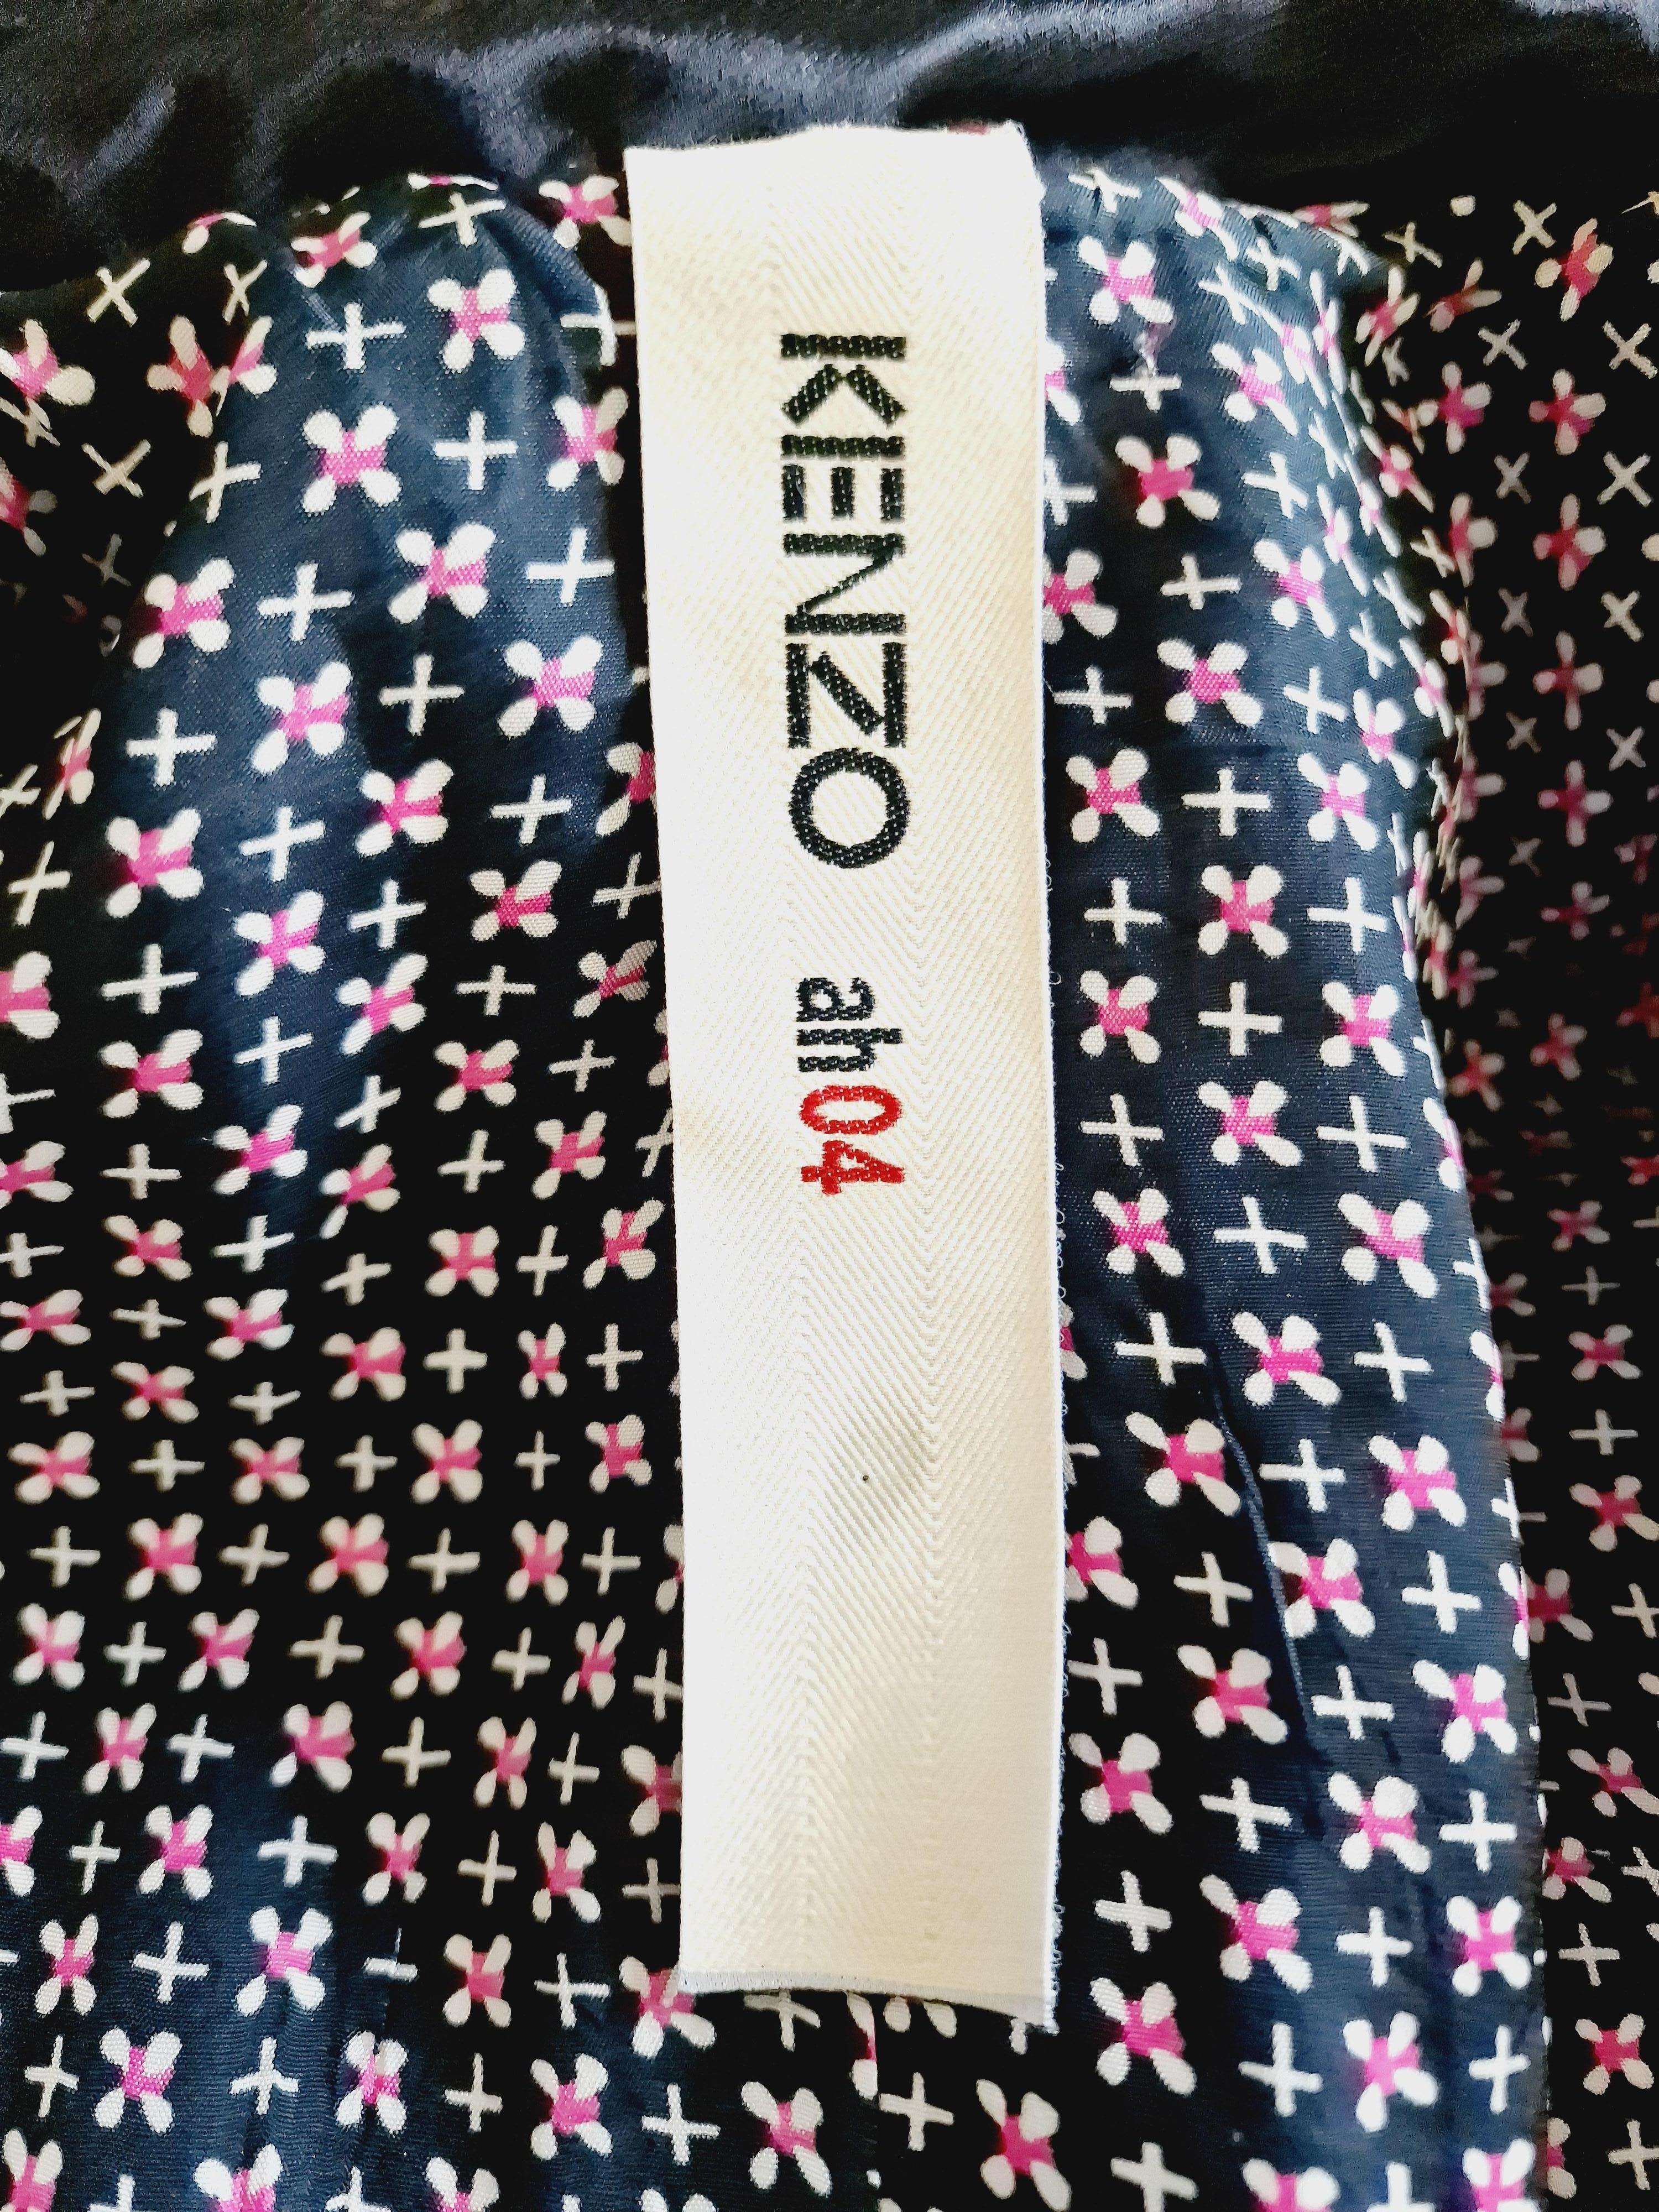 Kenzo Defile Kimono Couture Runway A/W 2004 AH04 Bell Bat Sleeve Silk et For Sale 10